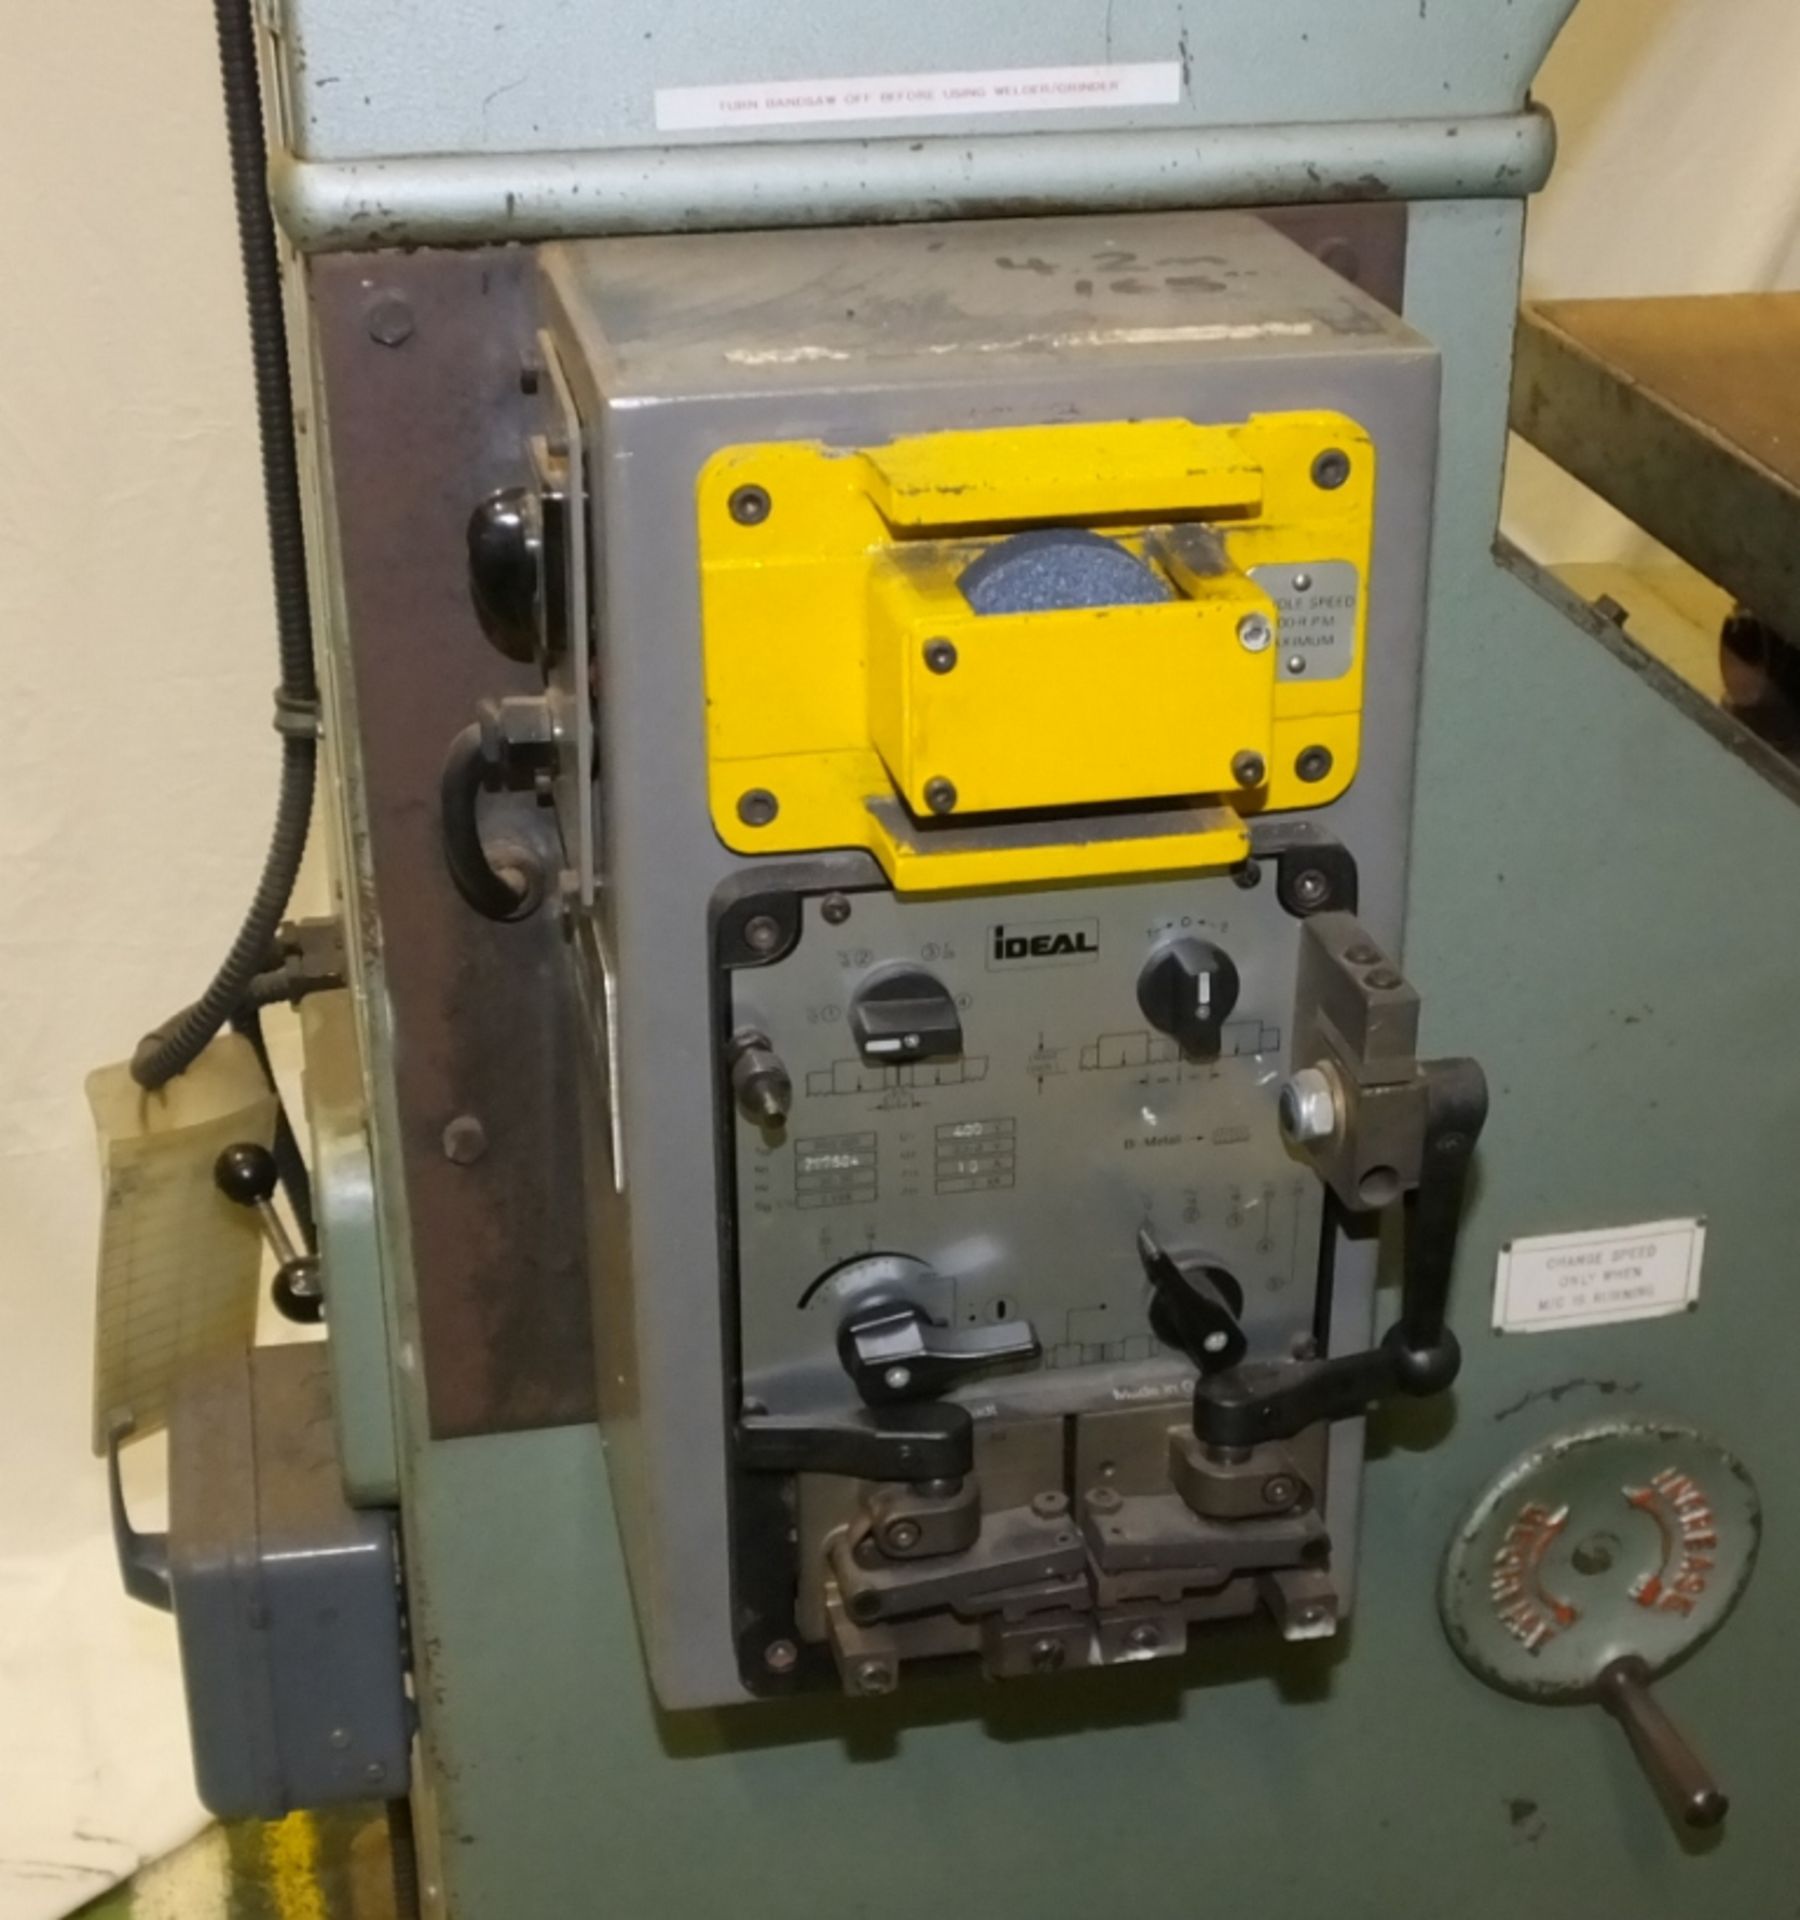 Hartle Midsaw "Minor Deepthroat" Tool Room Bandsaw - £20 Loading Charge Applied to this lo - Image 5 of 10